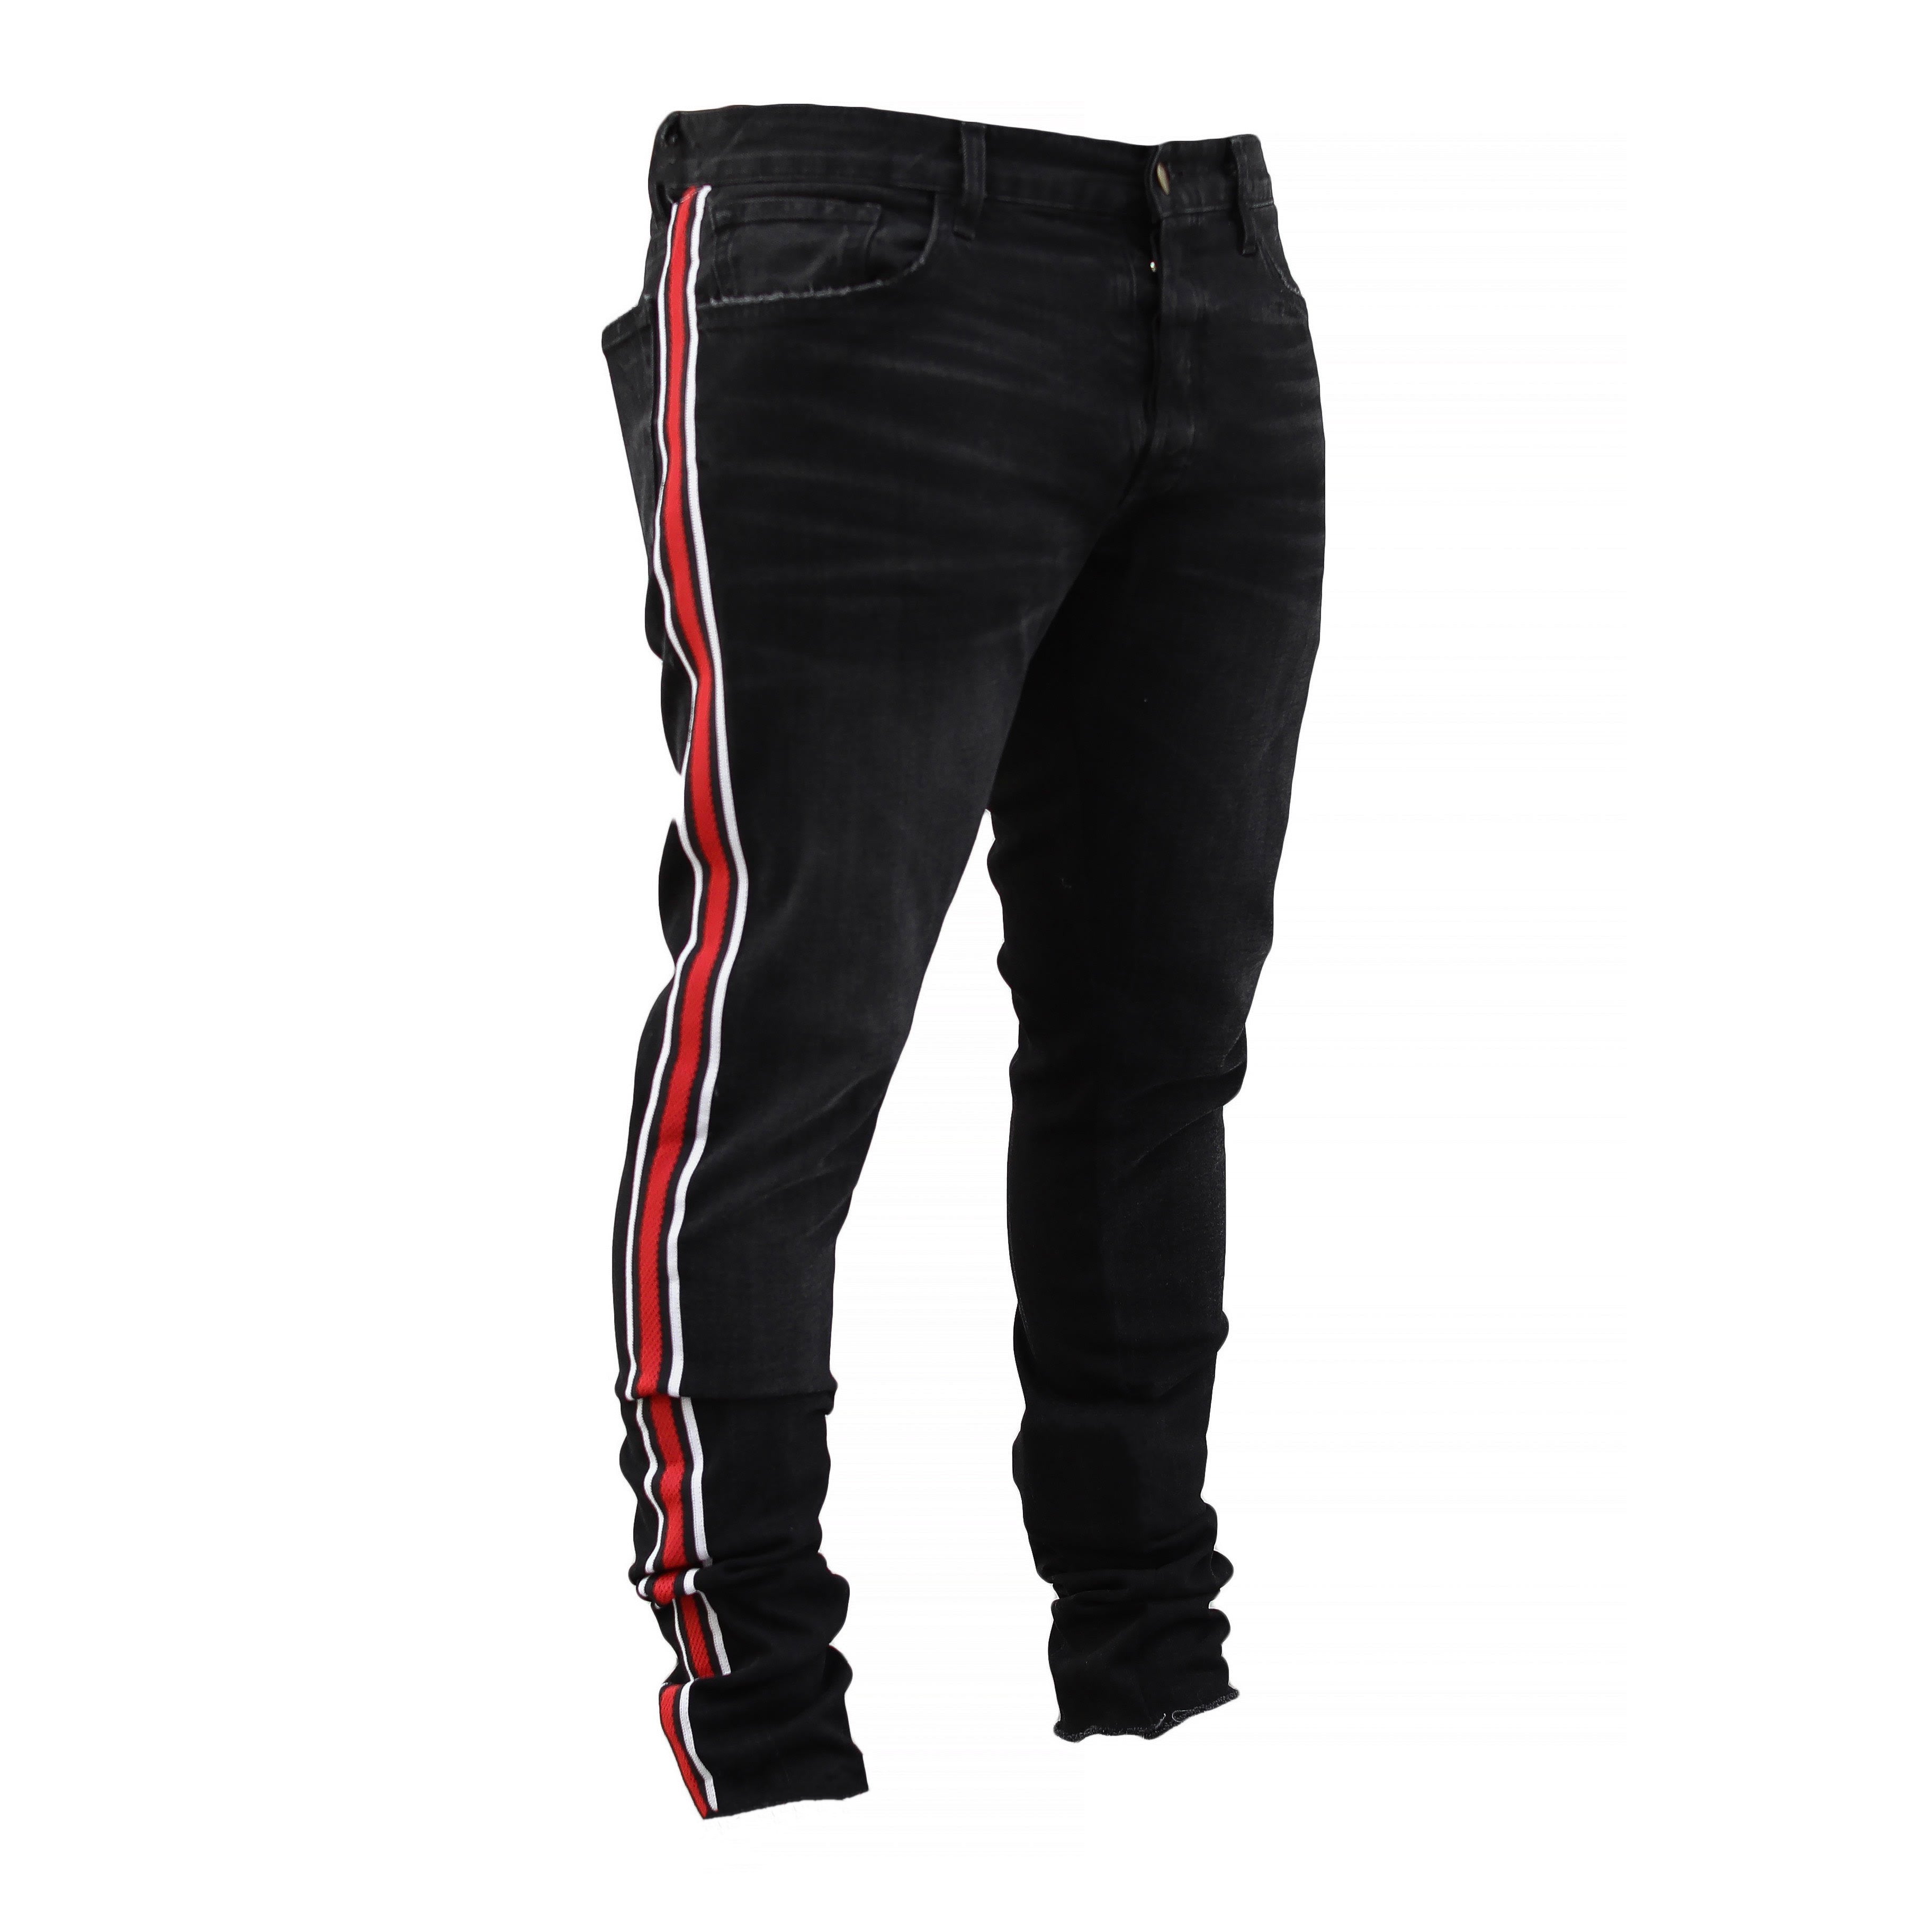 THE TRACK JEANS - BLACK/RED – CHRISTOS